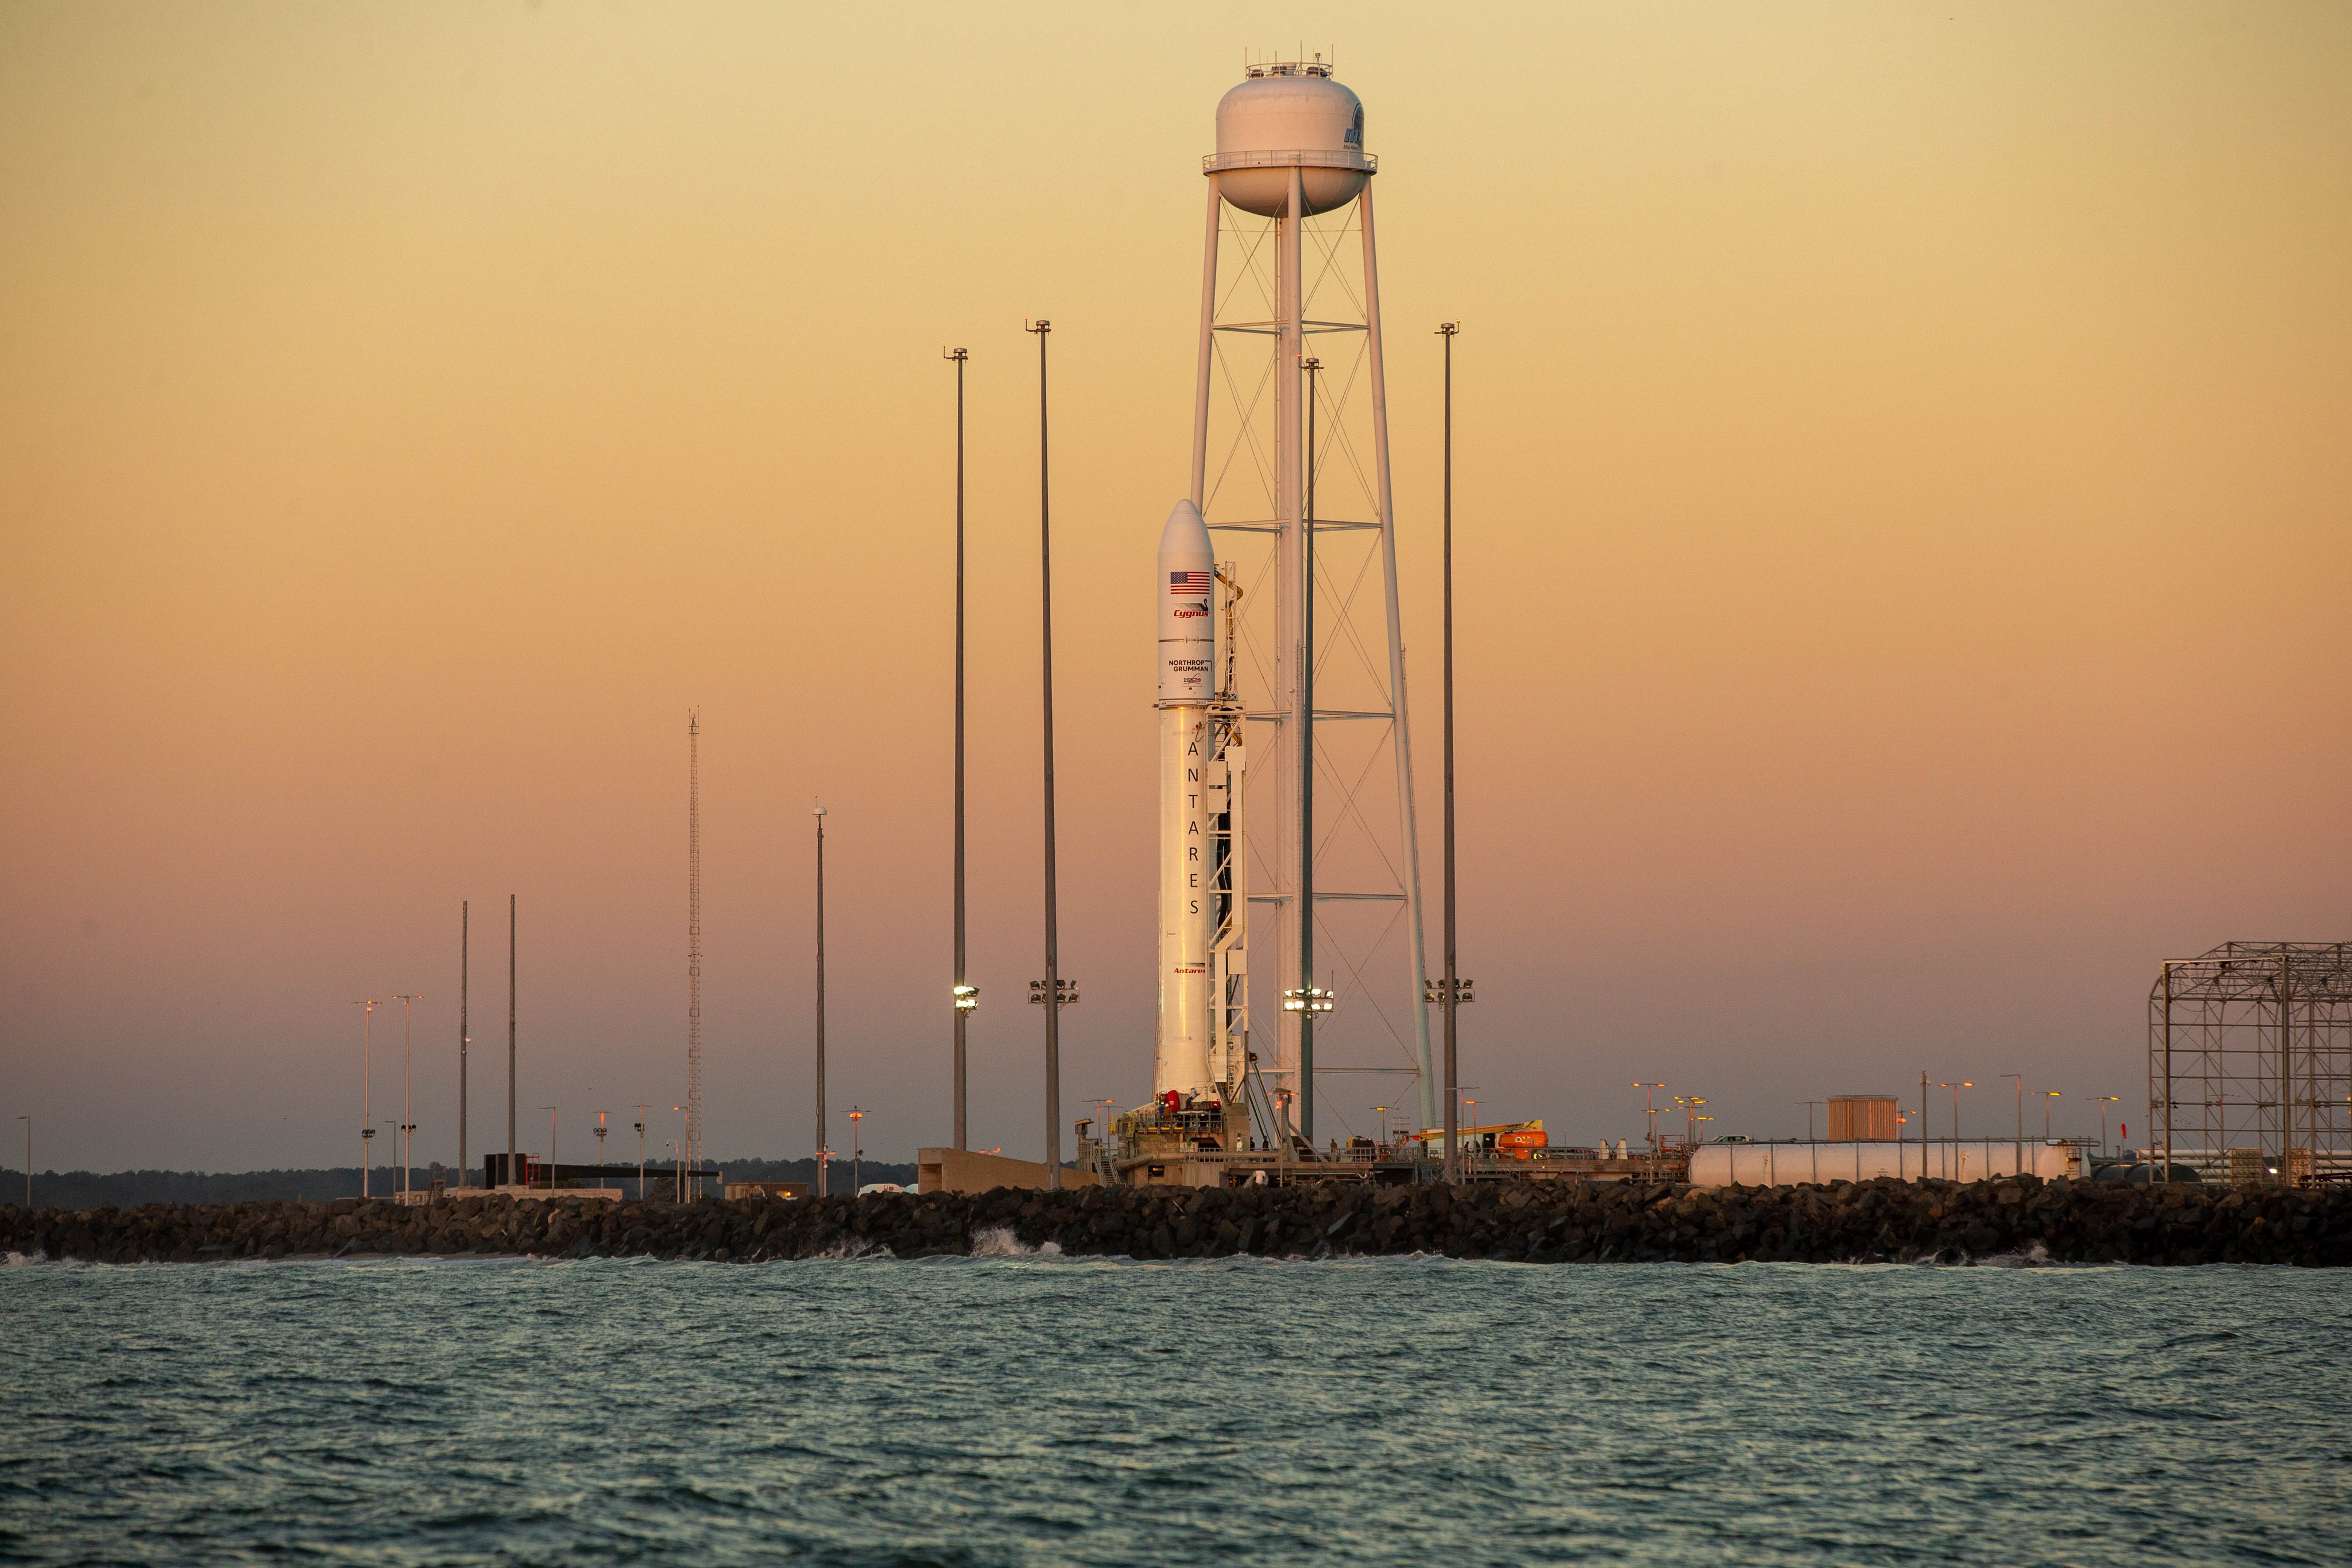 An Antares rocket stands poised to launch Northrop Grumman's NG-17 robotic resupply mission from NASA's Wallops Flight Facility in Virginia. Liftoff is scheduled for 12:39 p.m. EST (1739 GMT) on Feb. 19, 2022.